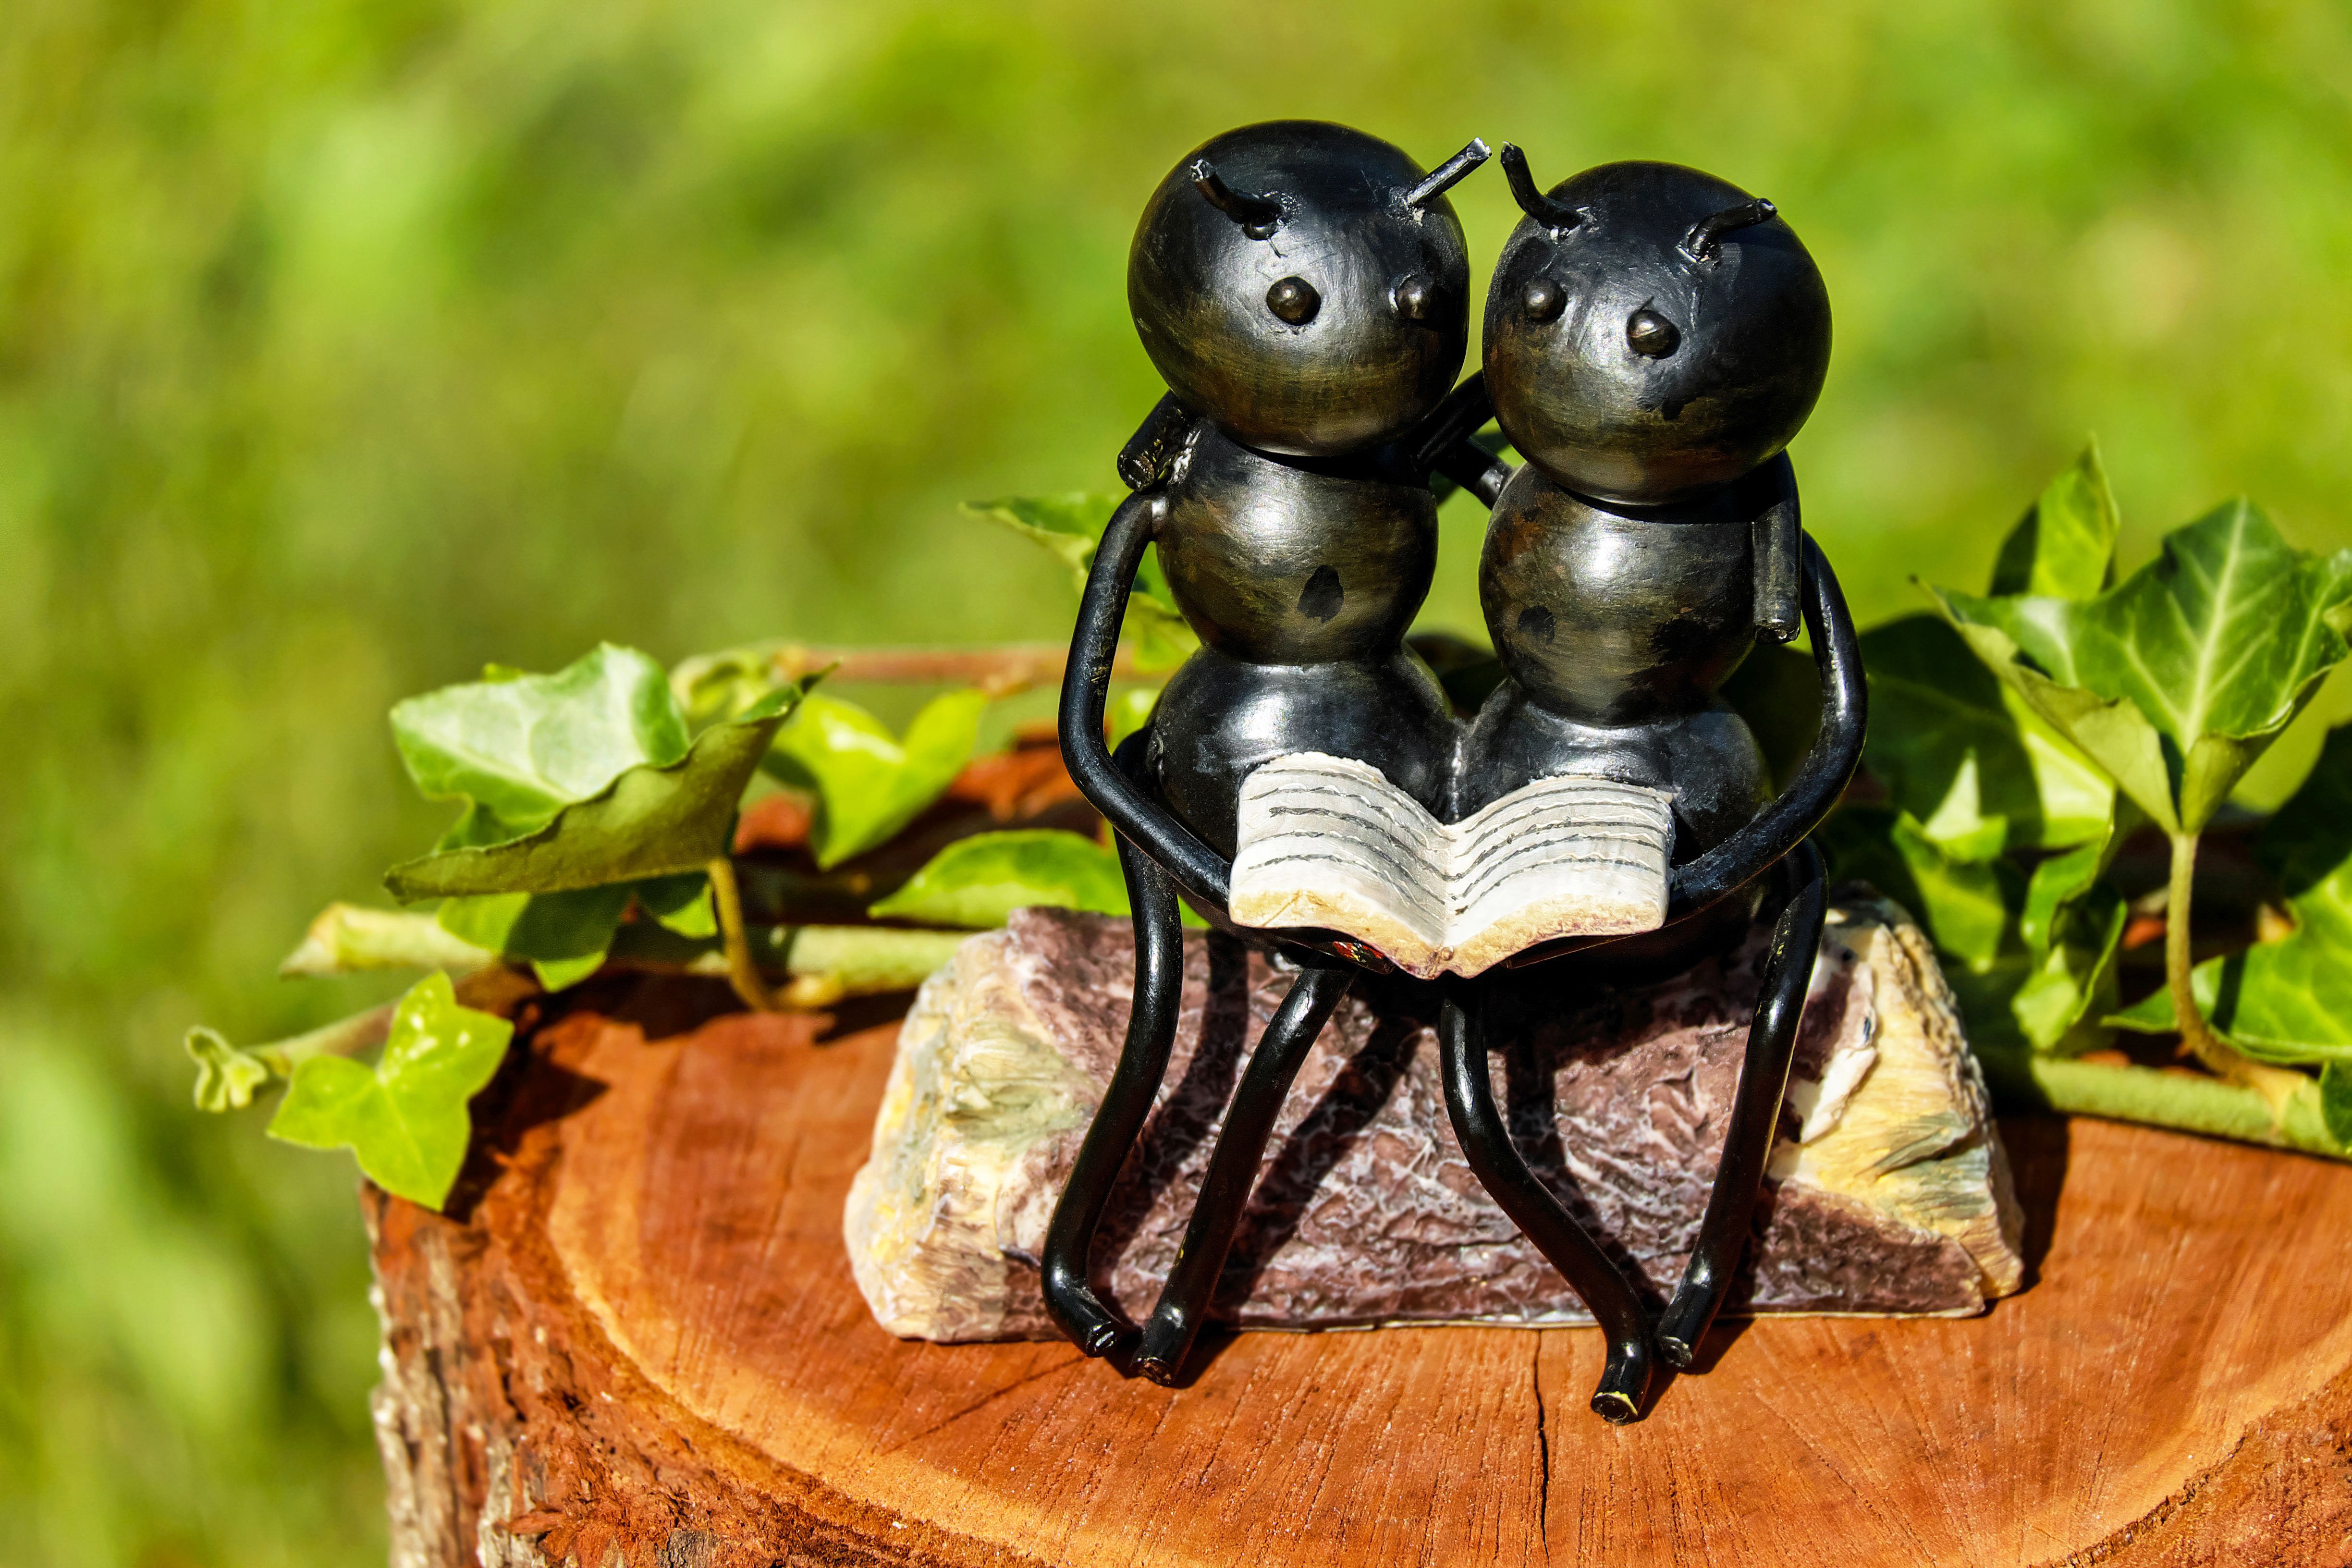 insects, miscellanea, miscellaneous, couple, pair, sculpture, book, bench, ants